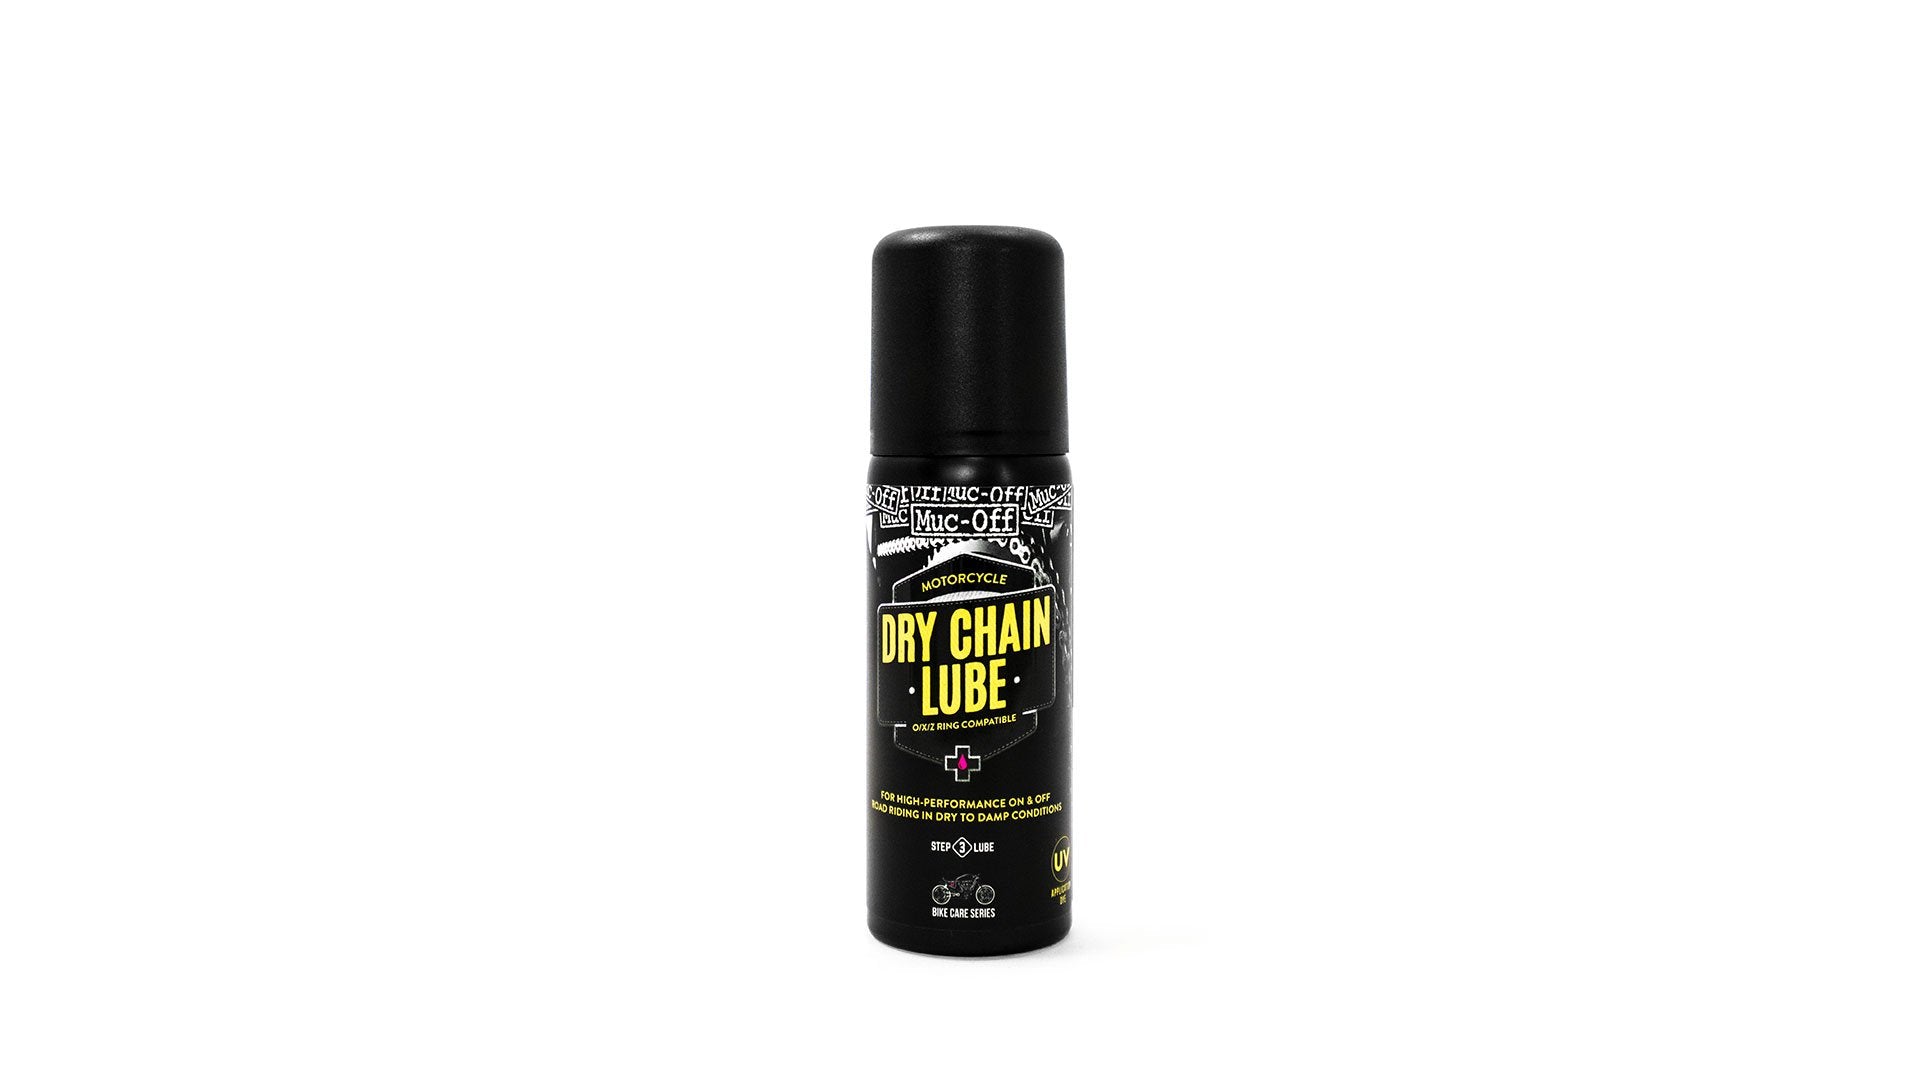 Dry Chain lube for motorcycles 